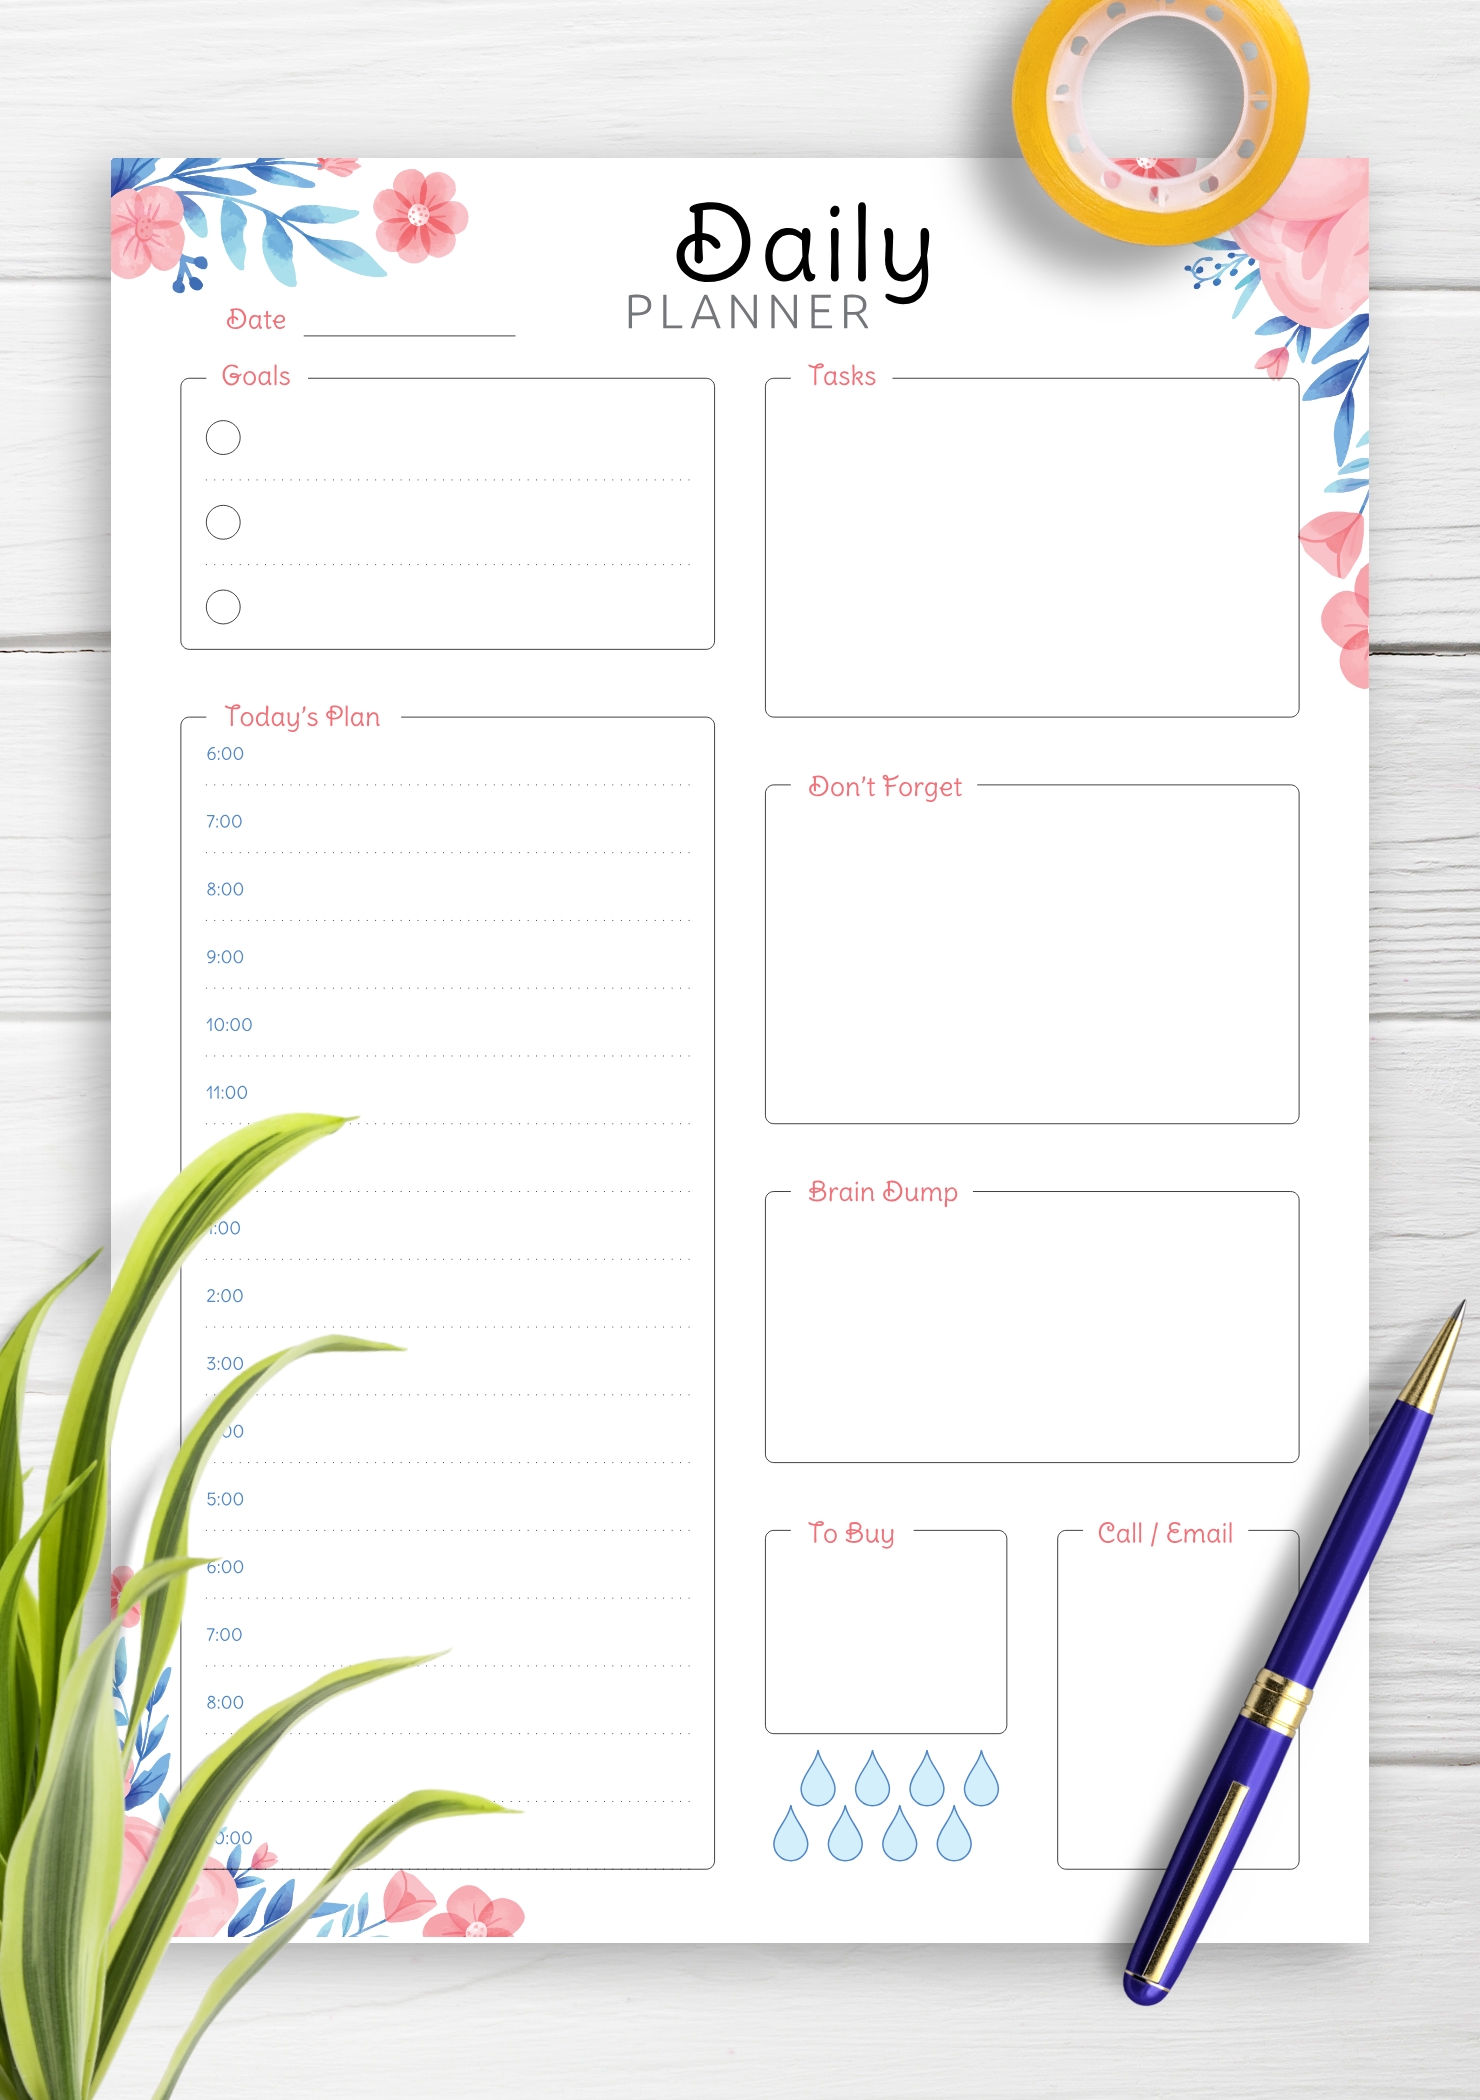 download-printable-hourly-planner-with-daily-tasks-goals-pdf